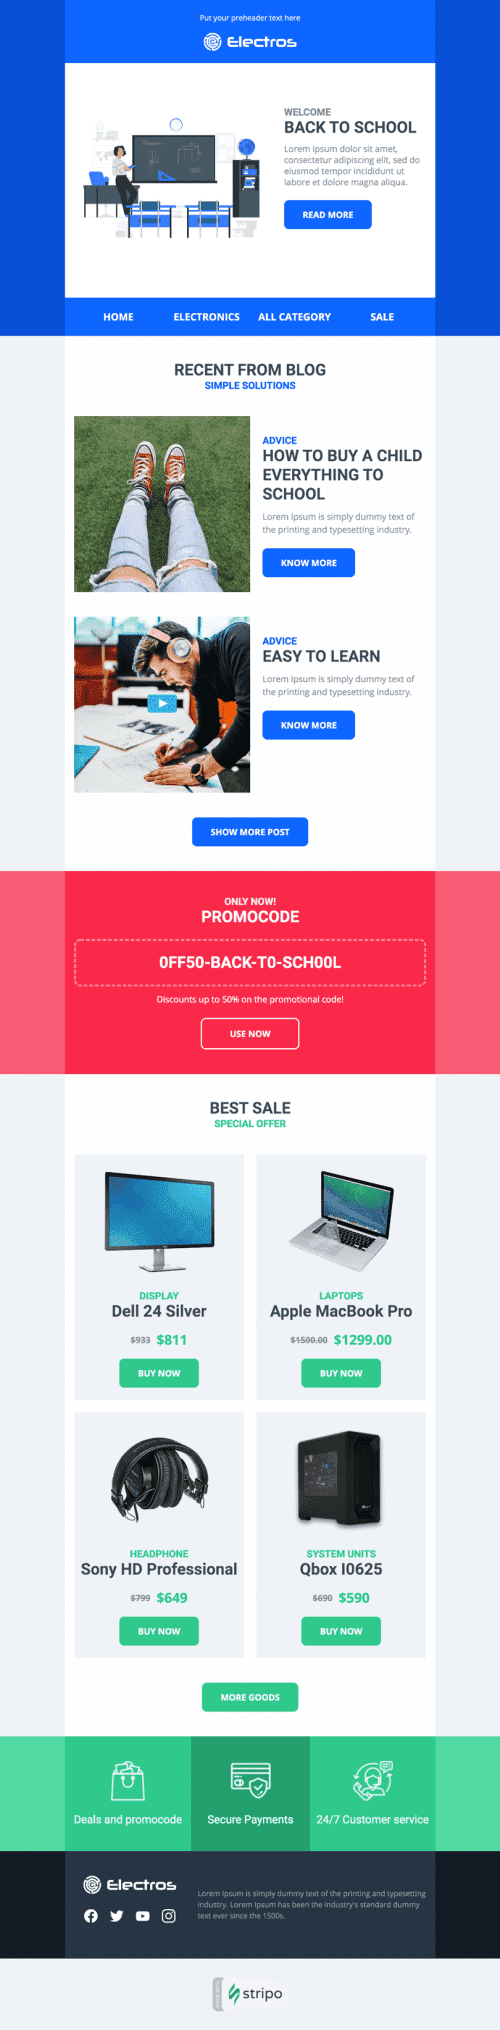 Back to School Email Template «Path to knowledge» for Gadgets industry desktop view